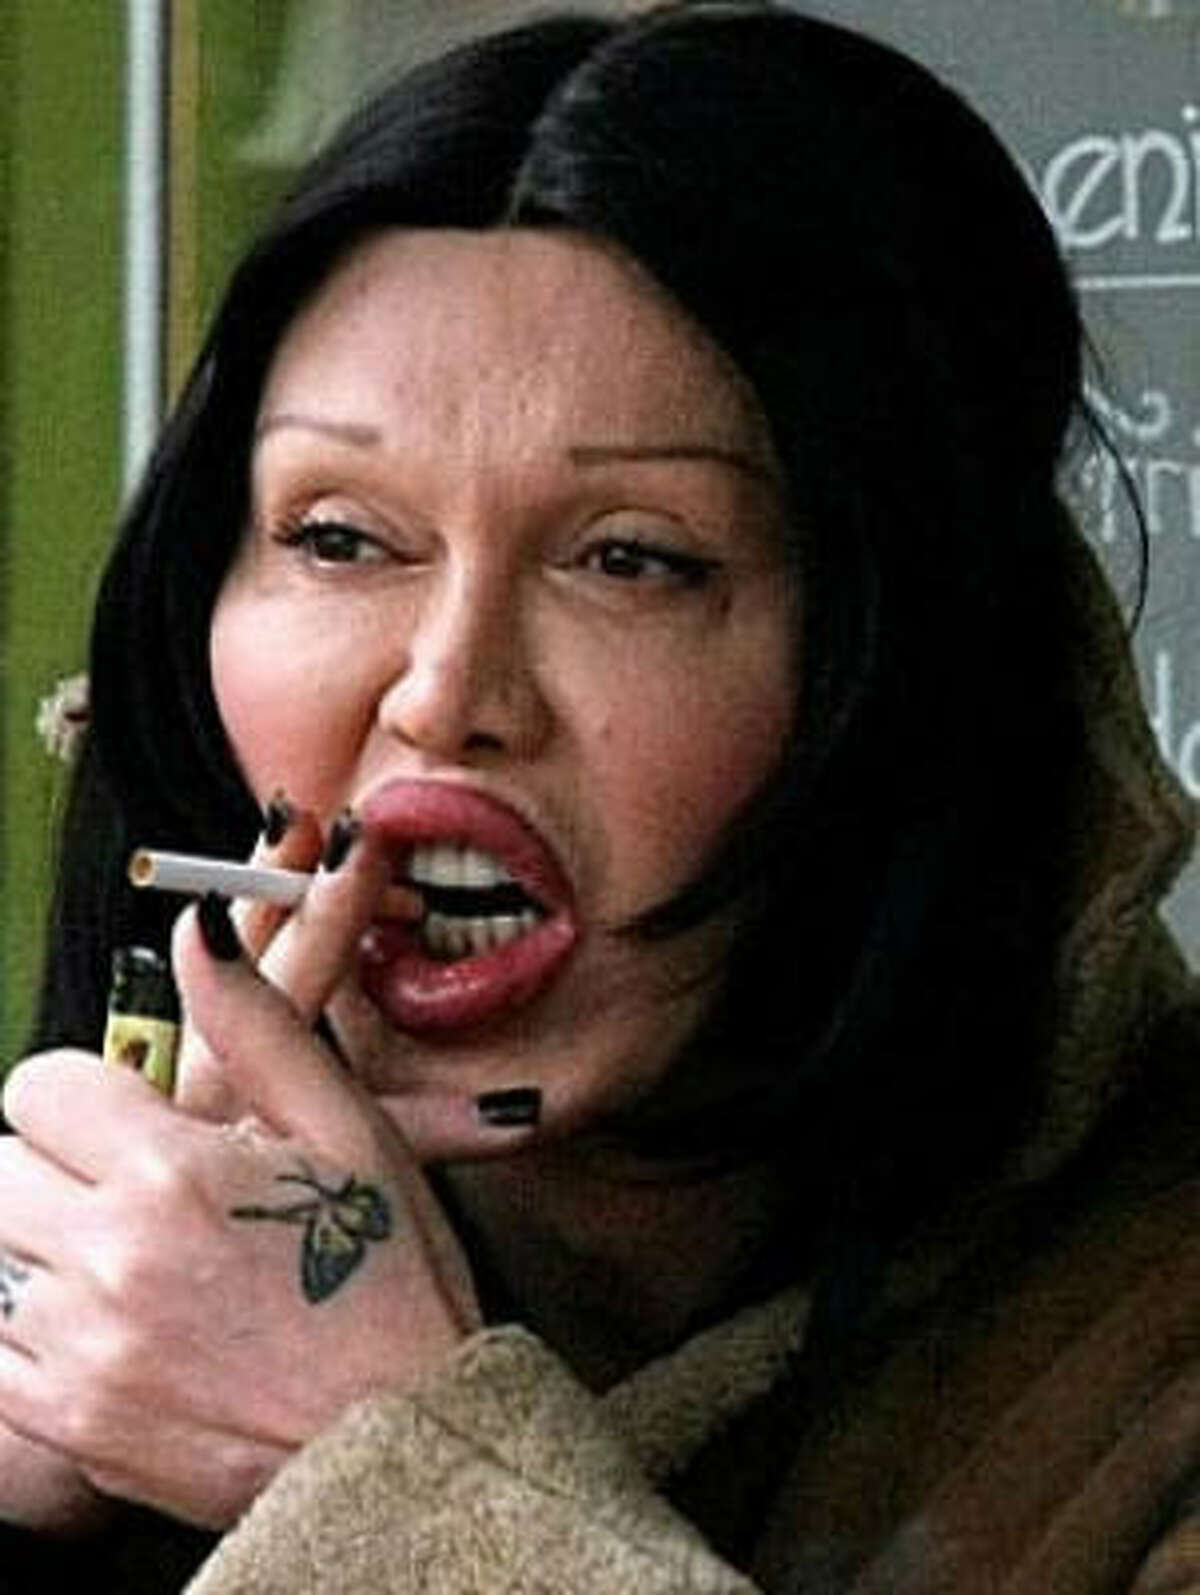 '80s singer Pete Burns won his medical malpractice lawsuit against the doctor who injected his lips with collagen. But he seems to have done a lot more since.